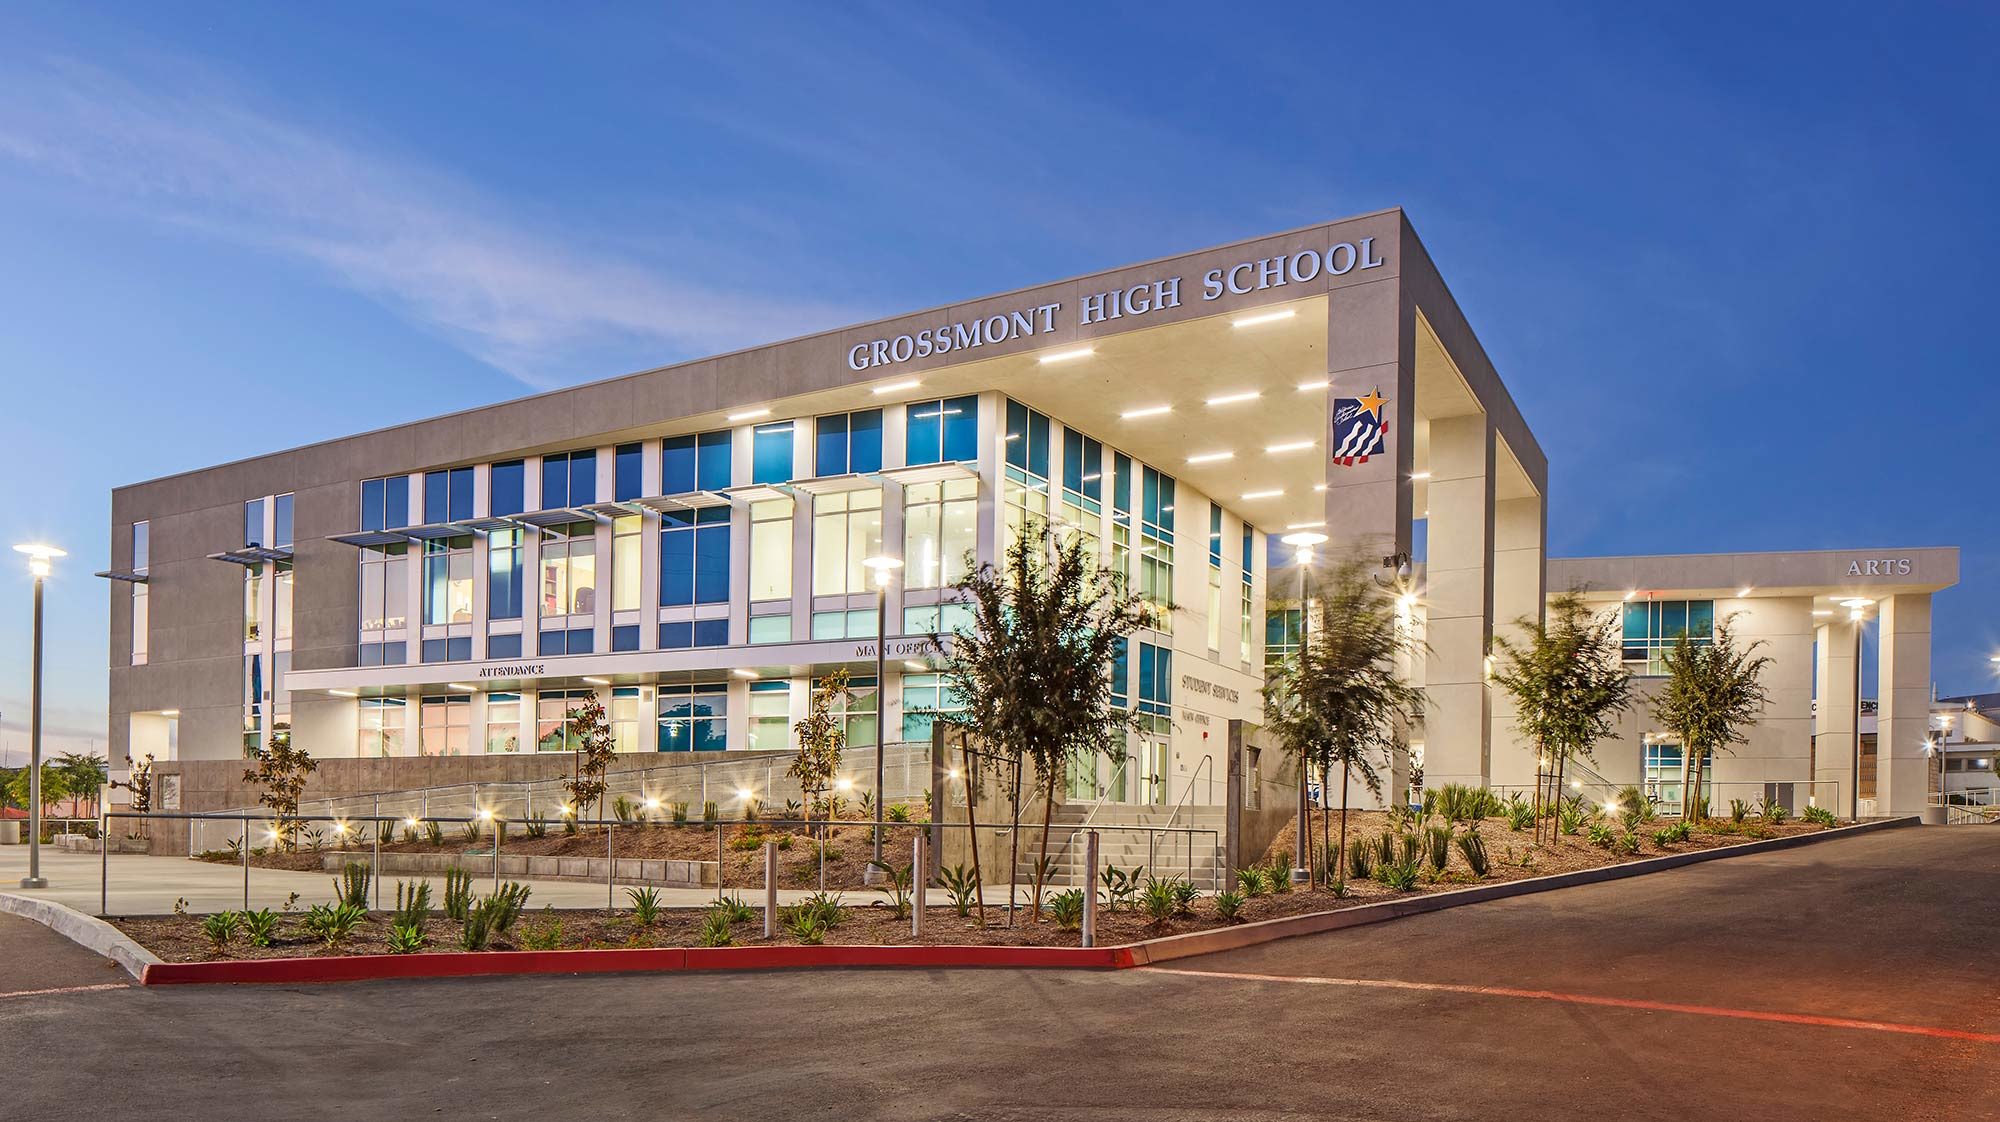 Grossmont High School Student Services and Arts Classroom Buildings